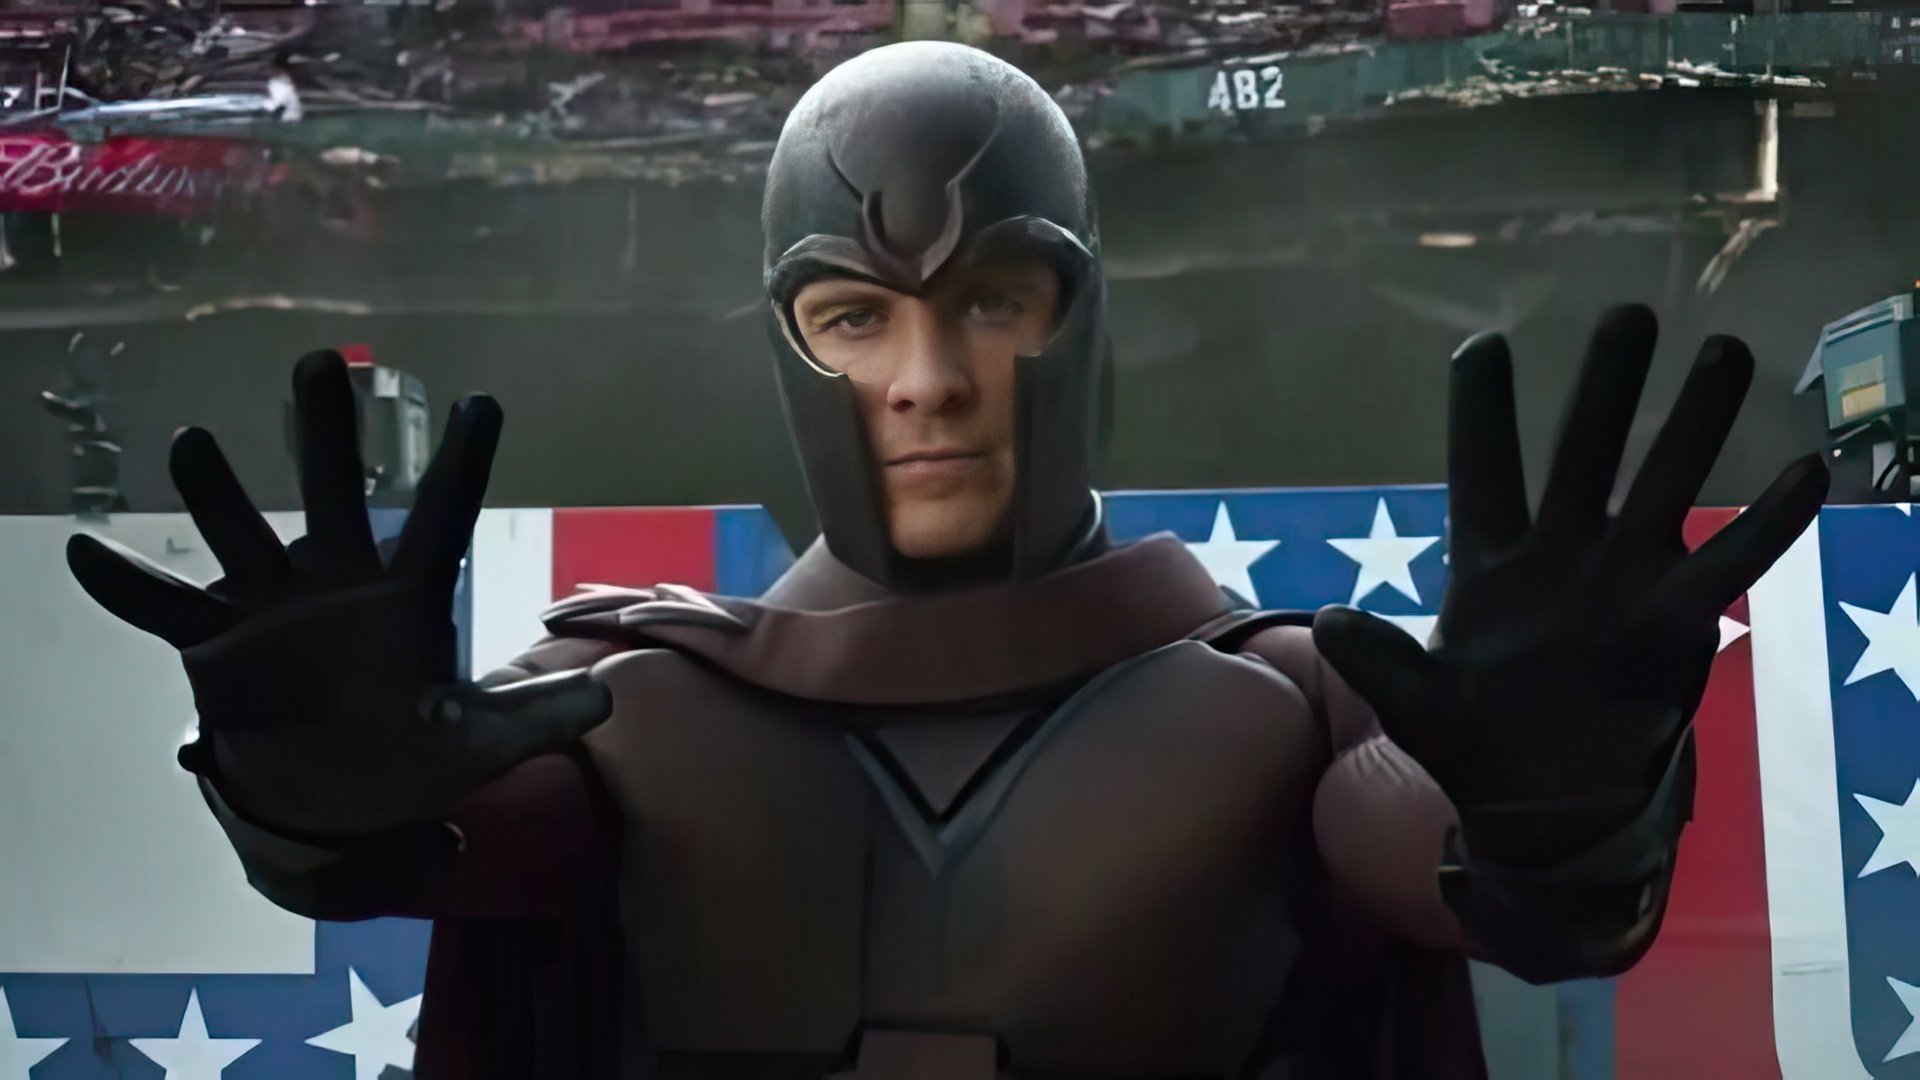 Fassbender in the role of Magneto